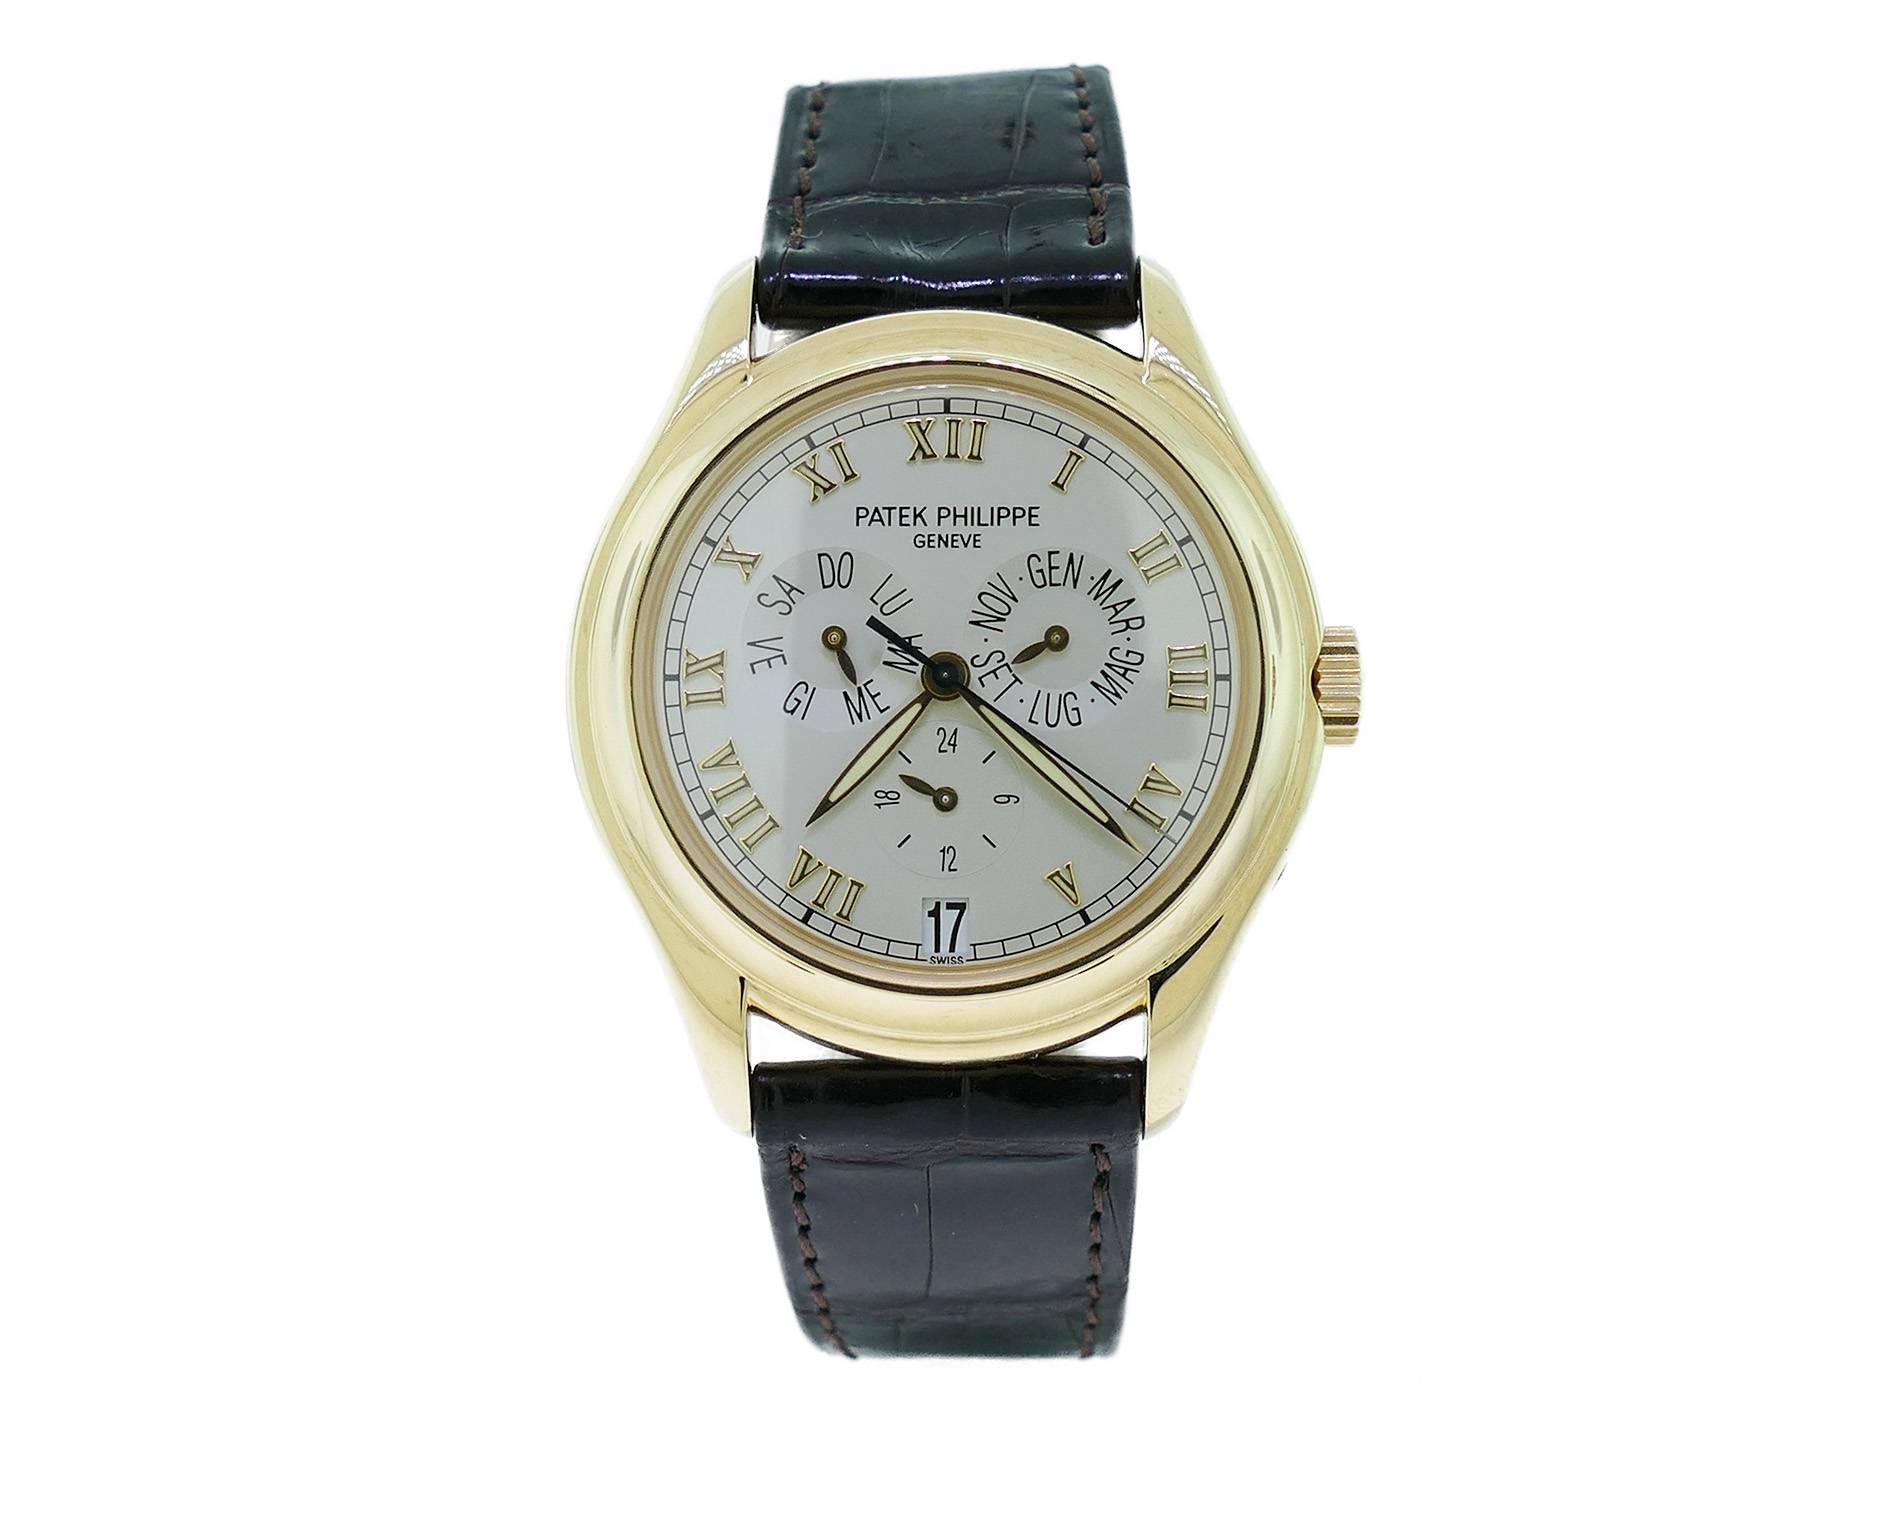 Mens 37mm Patek Philippe Ref 5035J Annual Calendar 18k Yellow Gold Watch. The Watch is in Excellent Condition & All functions are Working Great, Movement is Powered by Automatic Mechanical Winding. Dial Is in Spanish. The Watch is on a Patek Strap &